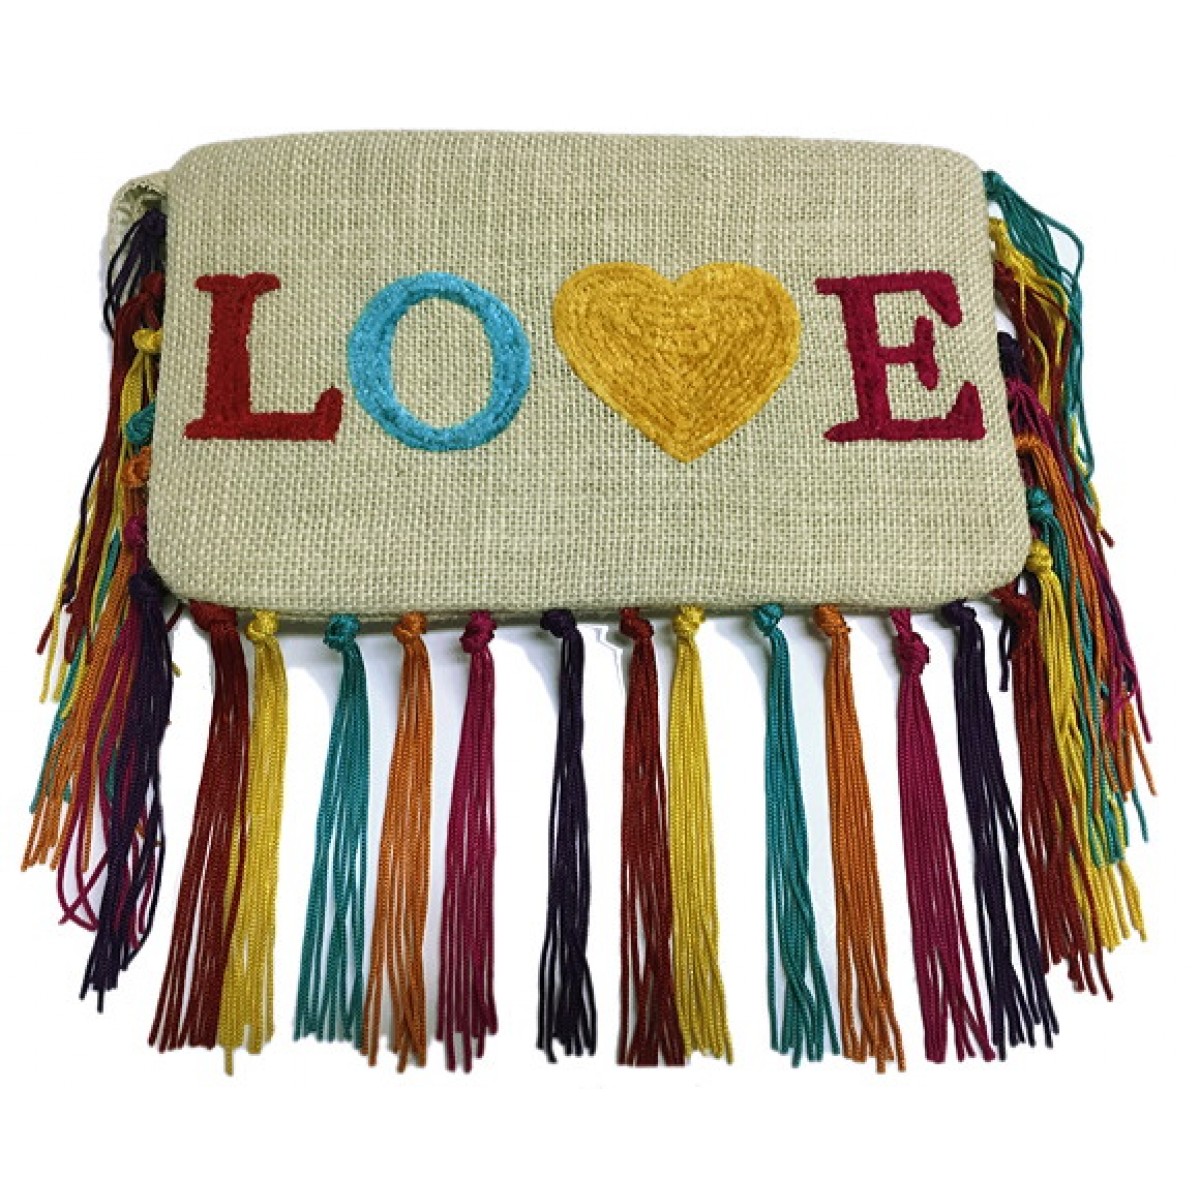 Large Zipper Pouch With Fringe